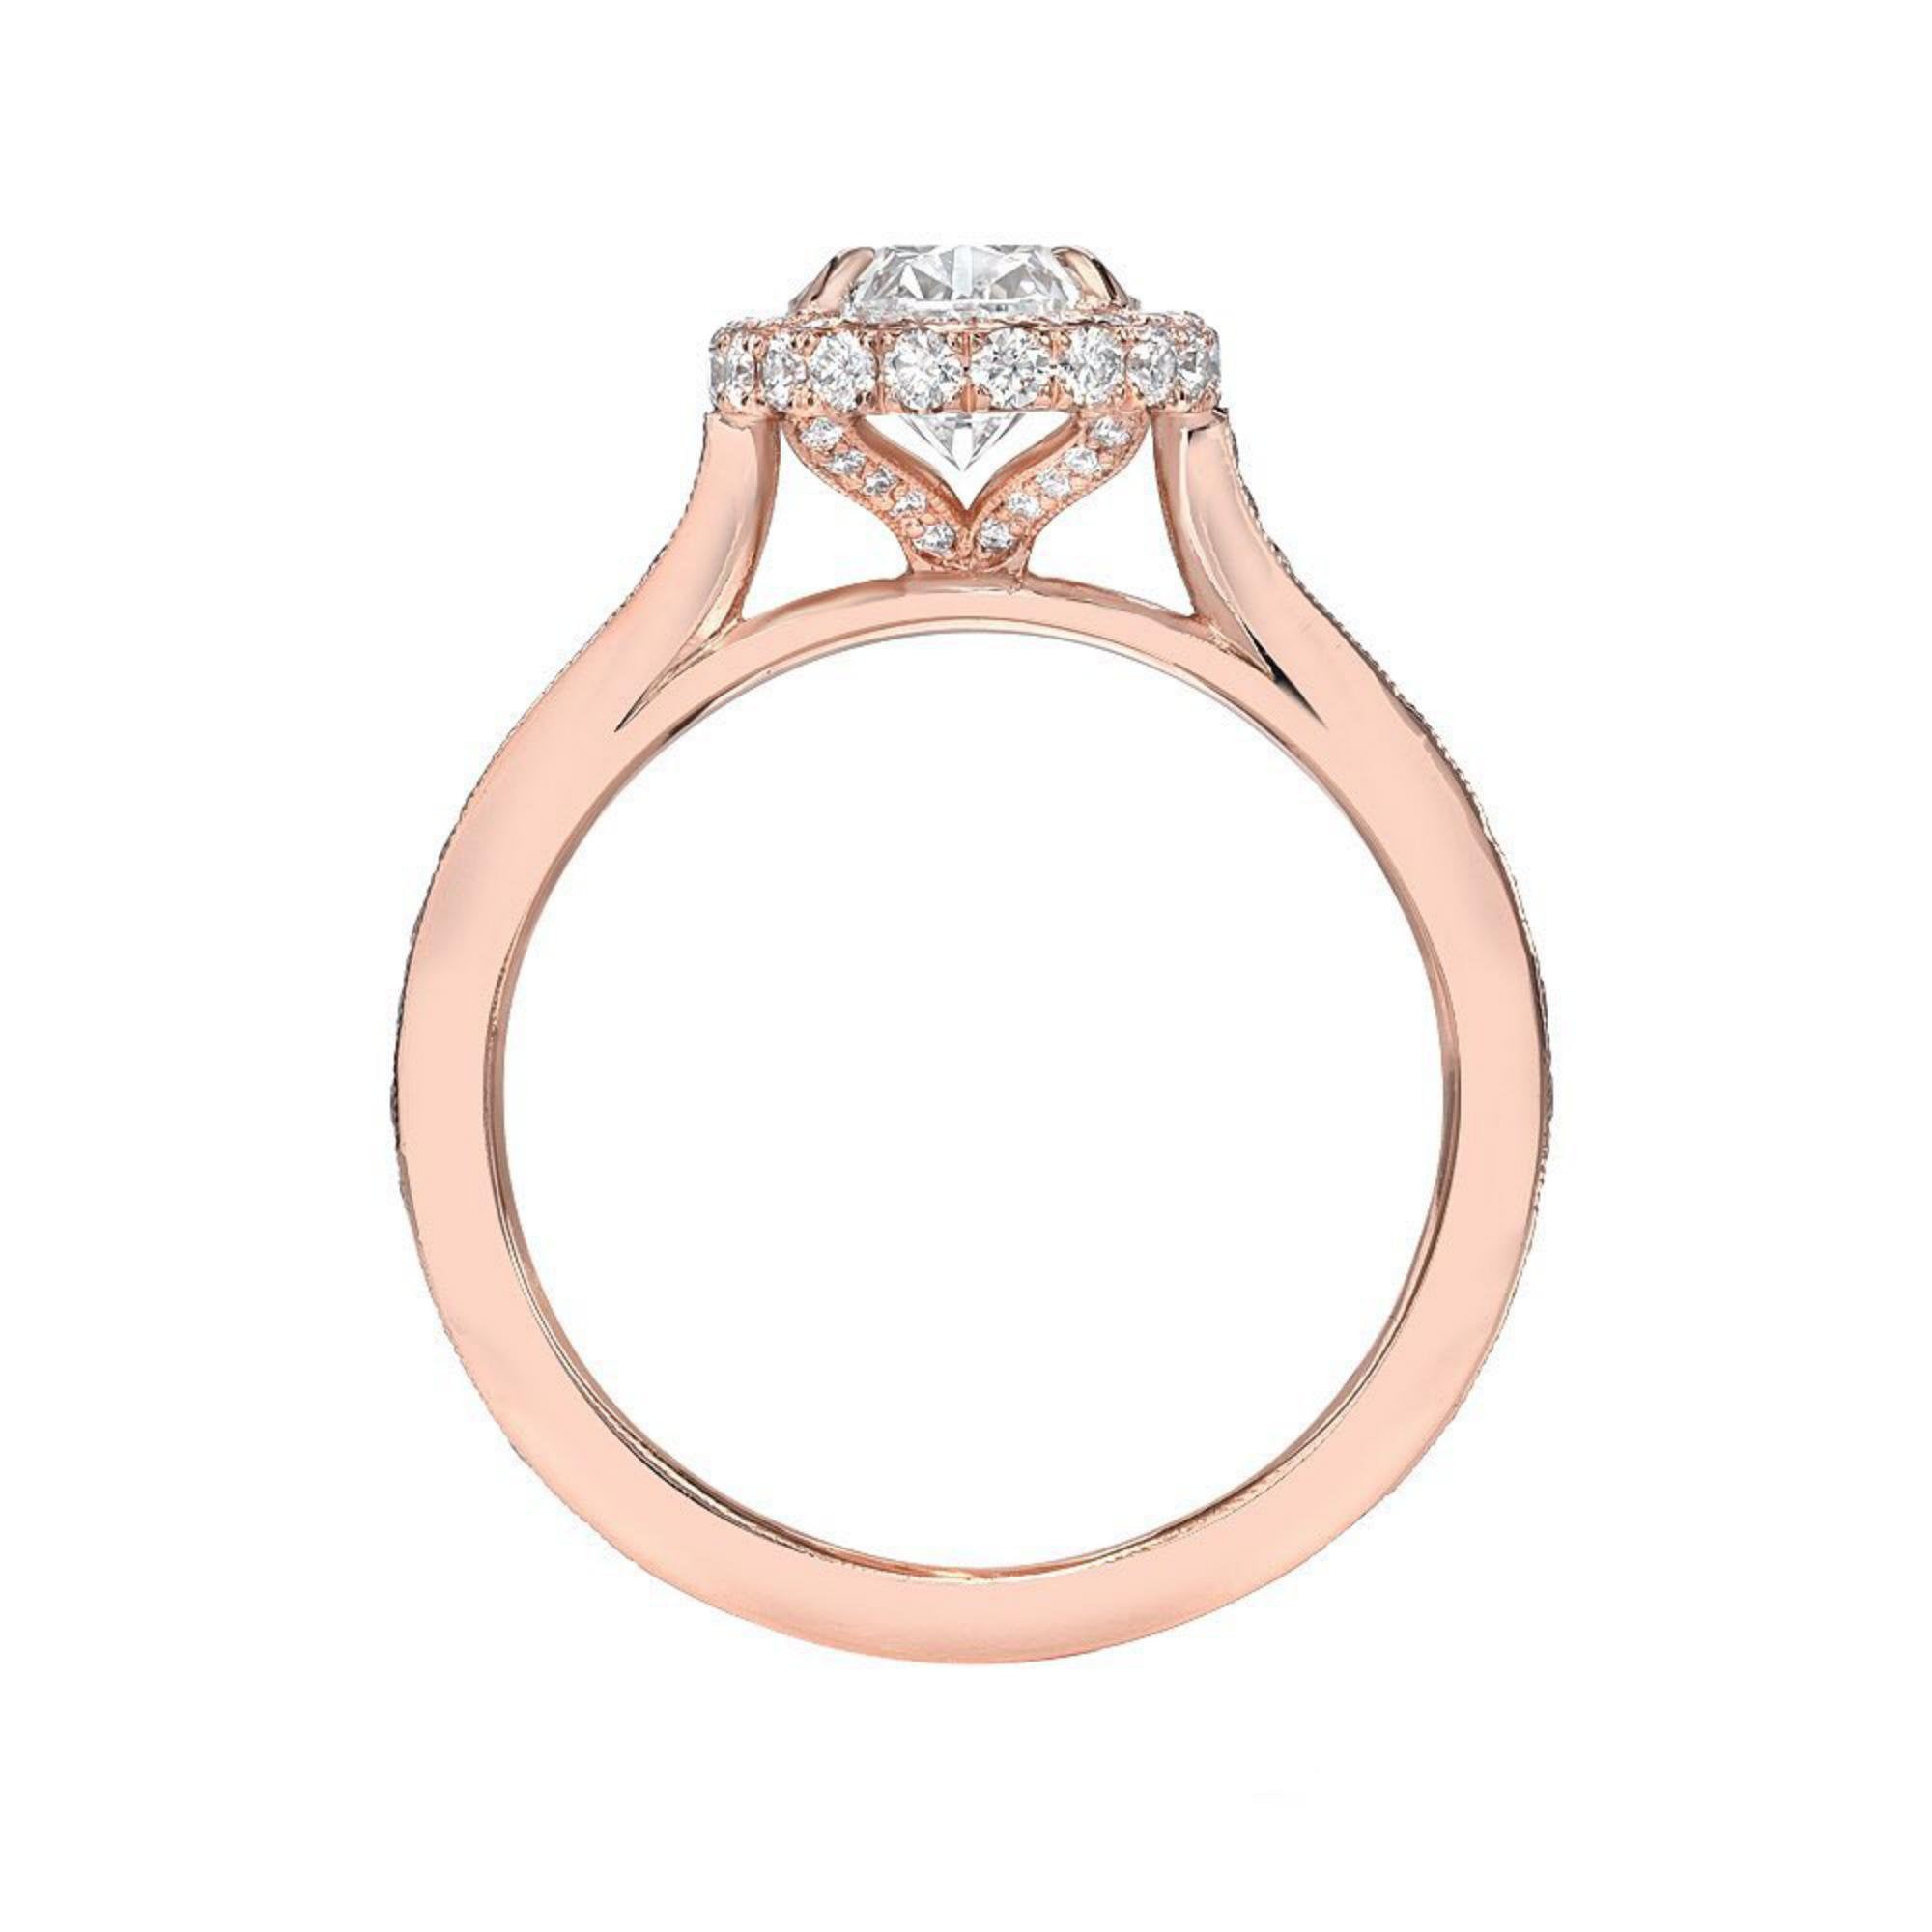 2 carat Rose Gold Engagement Ring, Oval Halo Ring,